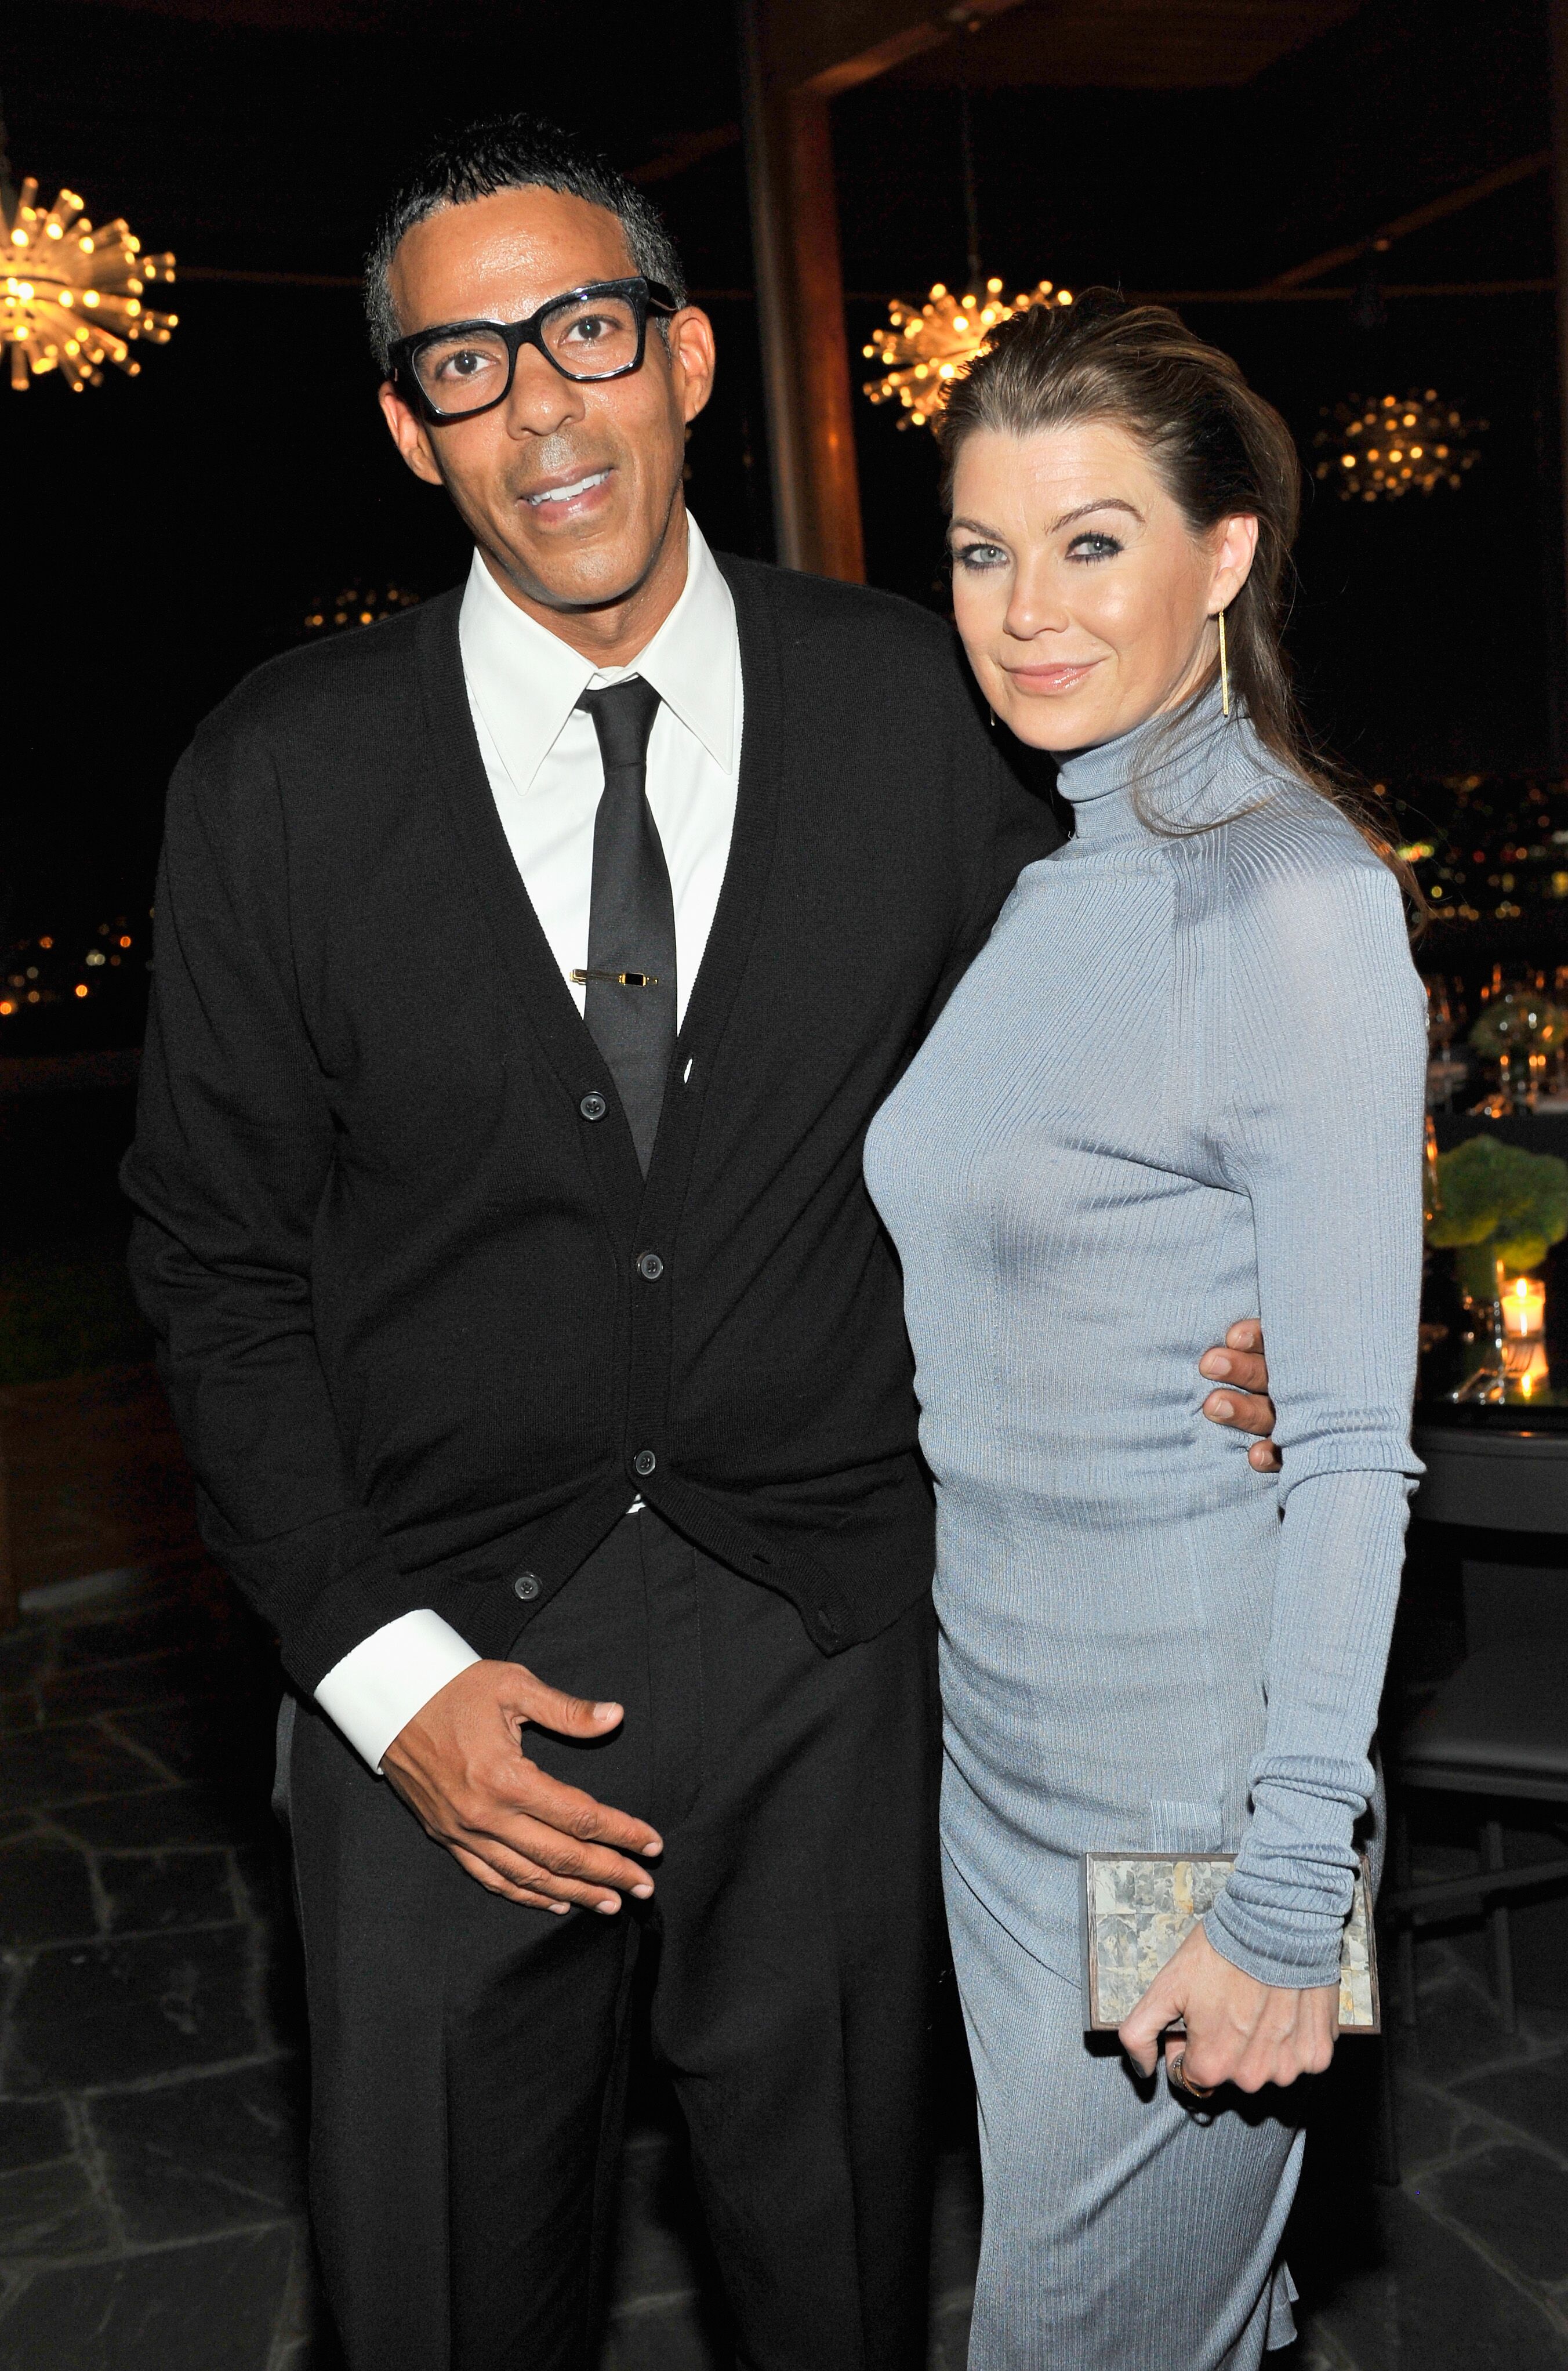 Chris Ivery and Ellen Pompeo attend a private dinner hosted by VOGUE to celebrate TOD'S Creative Director Alessandra Facchinetti on November 5, 2014 in Los Angeles, California. | Source: Getty Images